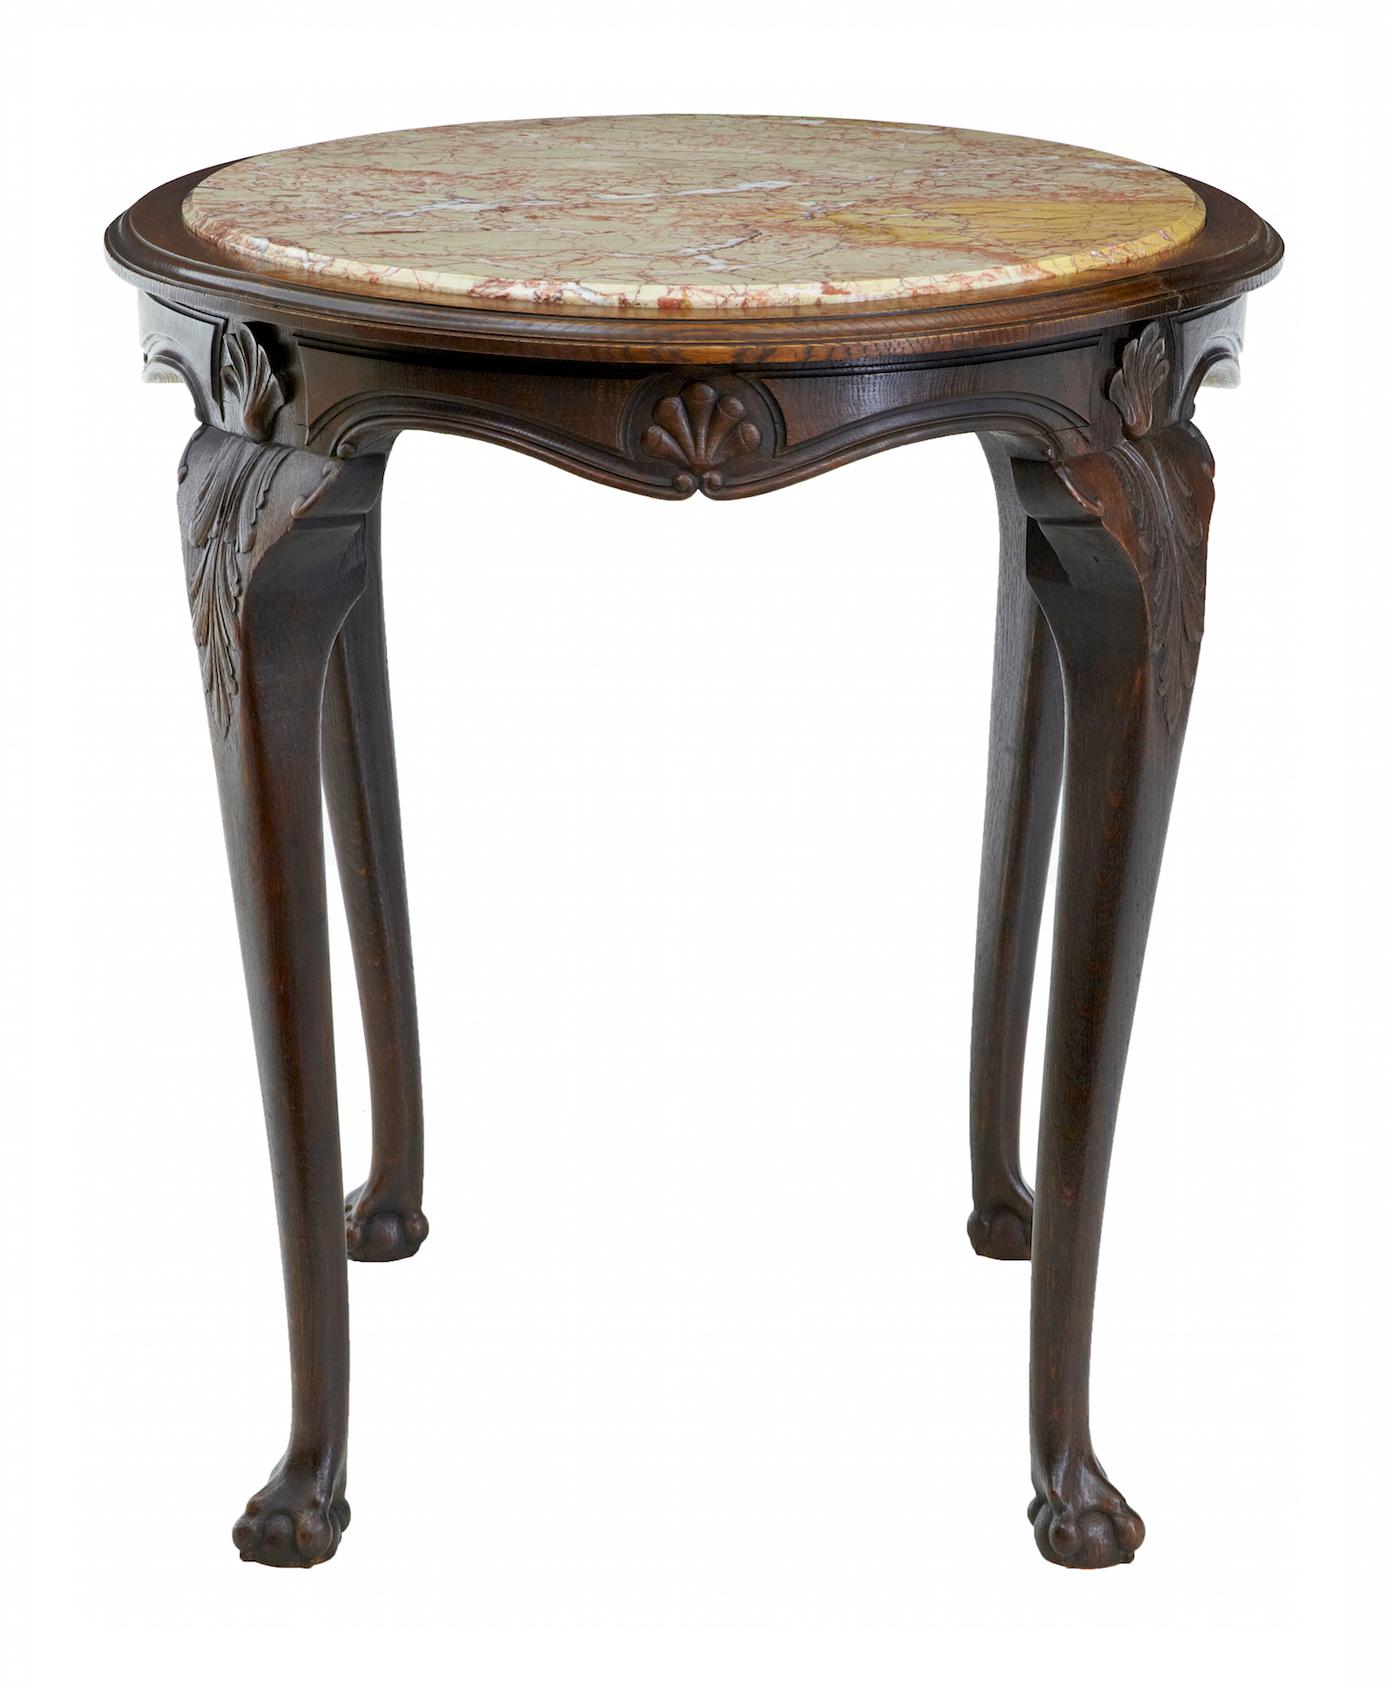 19th century French oak marble top center table circa 1880.

Art Nouveau oak center table, stunning inset veined marble top with carved shells to the apron. Standing on 4 cabriole legs with further shells and carved leaves. Terminating on a ball